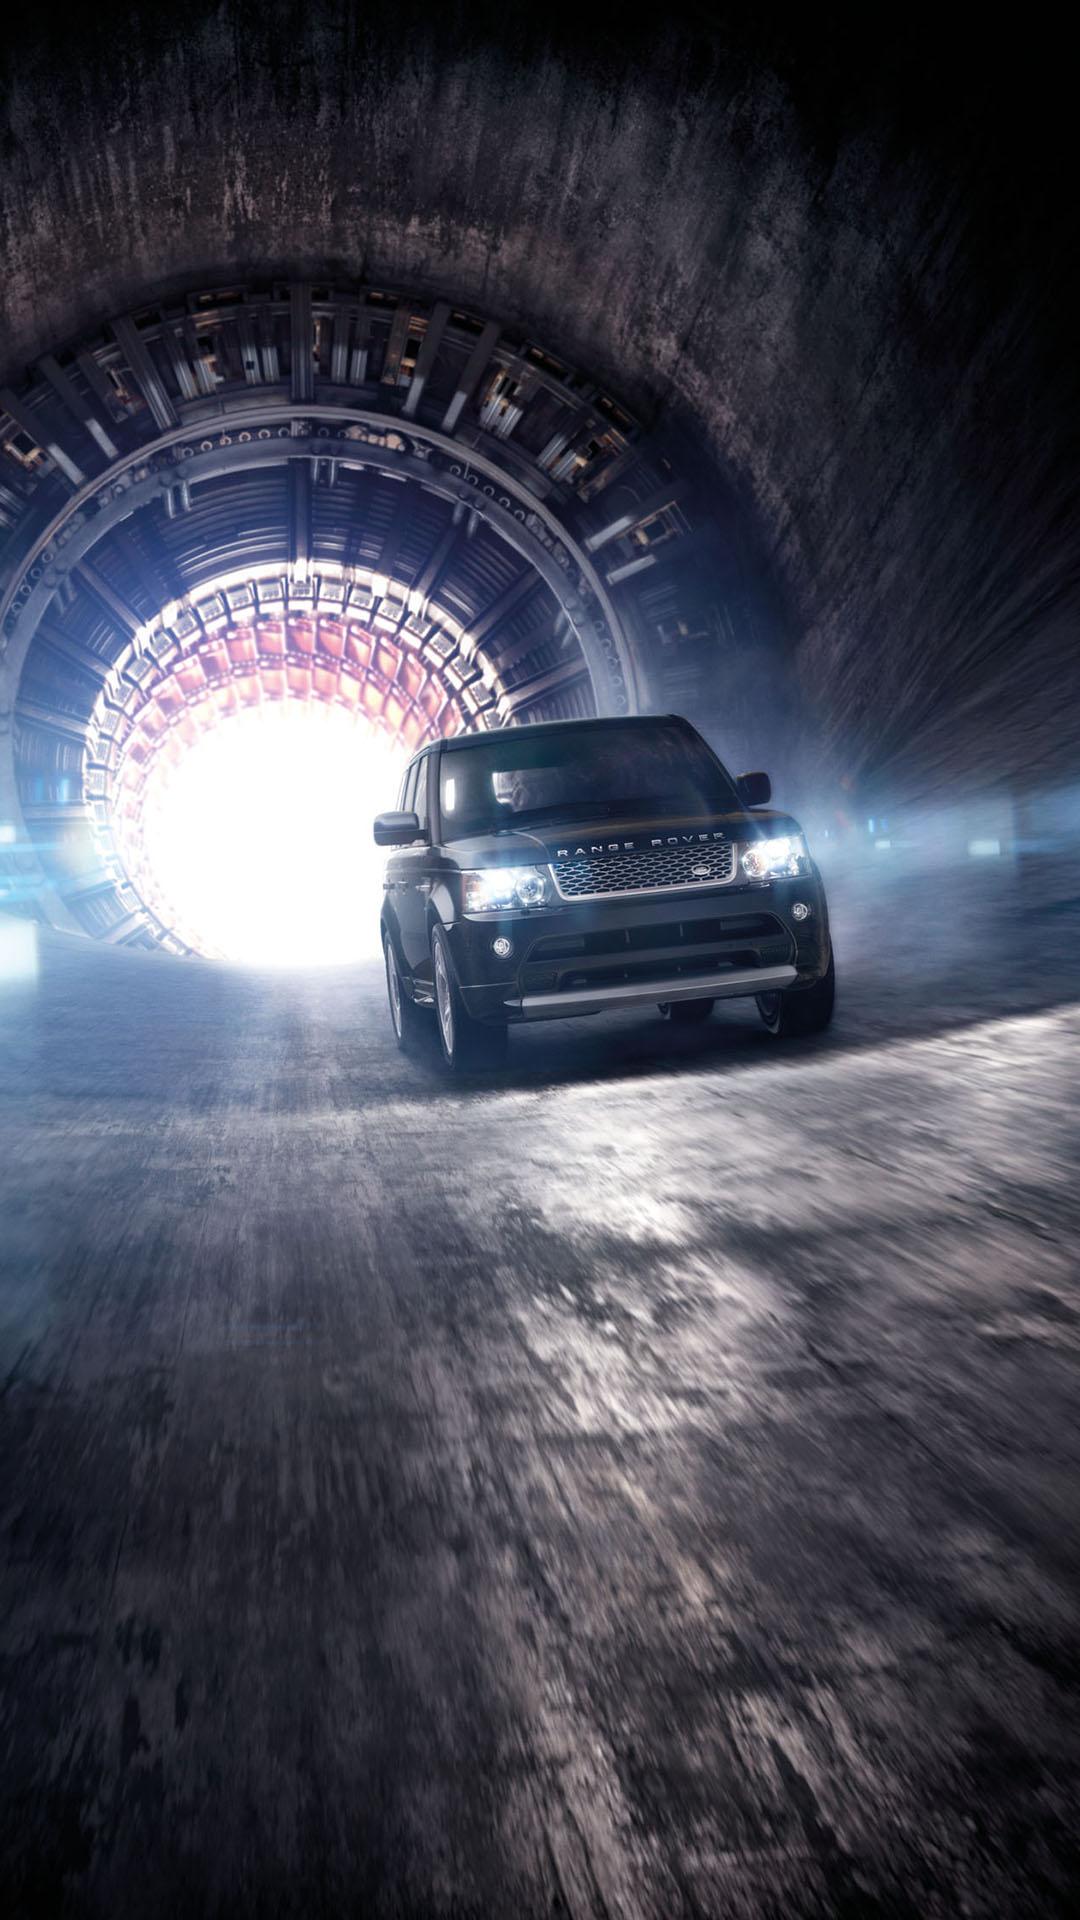 Range Rover Sport htc one wallpaper, free and easy to download